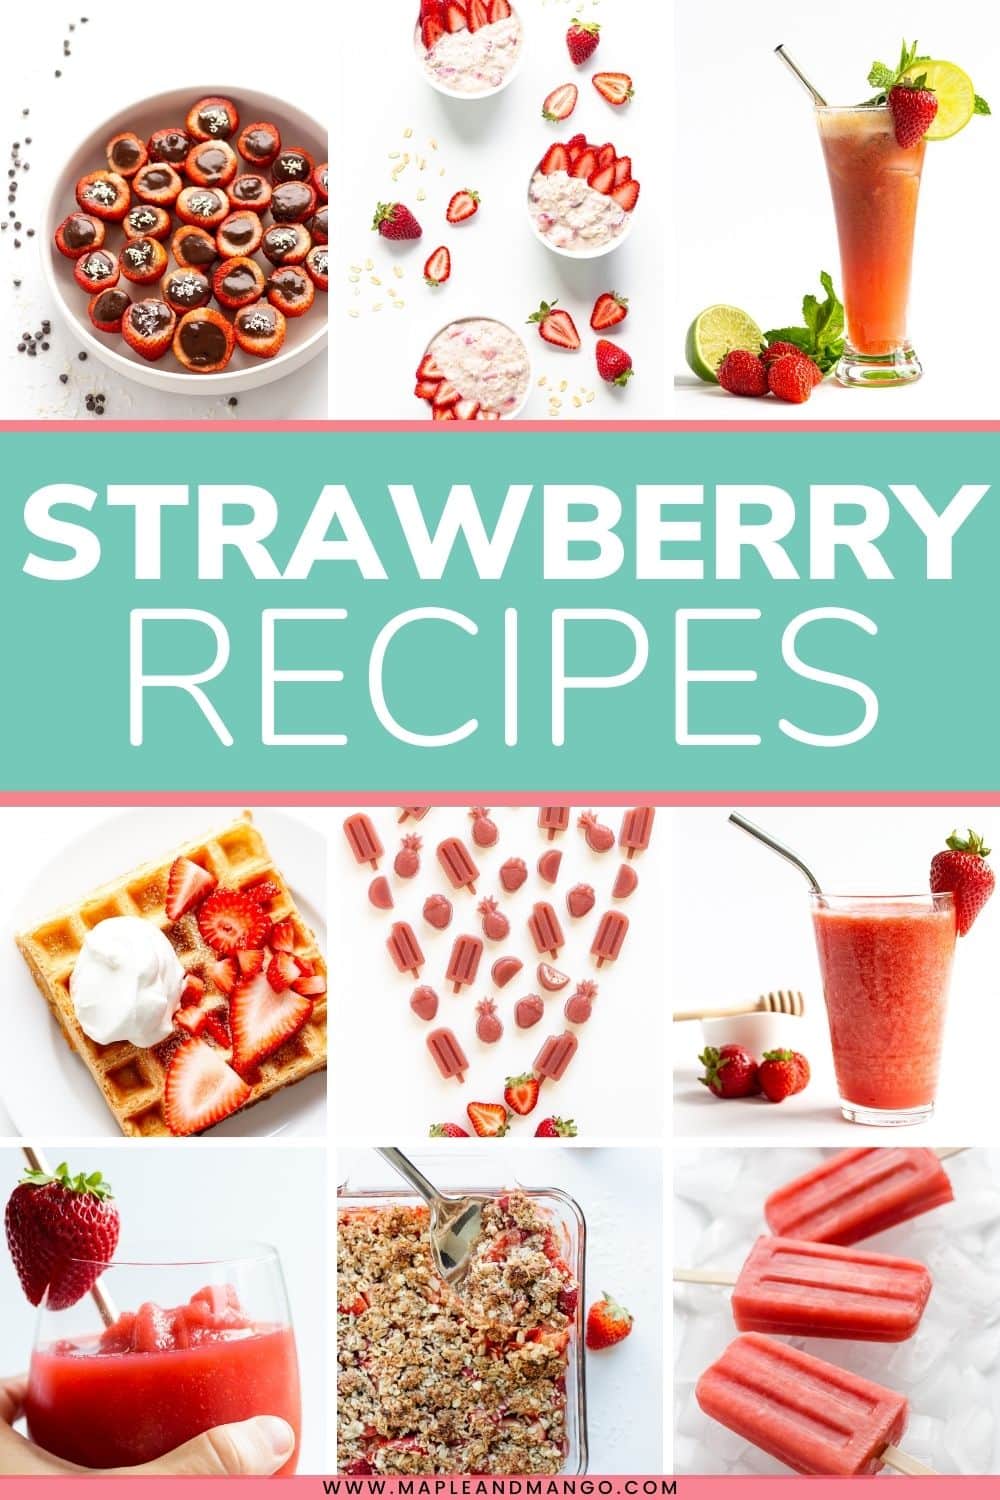 Collage of recipe photos featuring strawberries with text overlay "Strawberry Recipes".